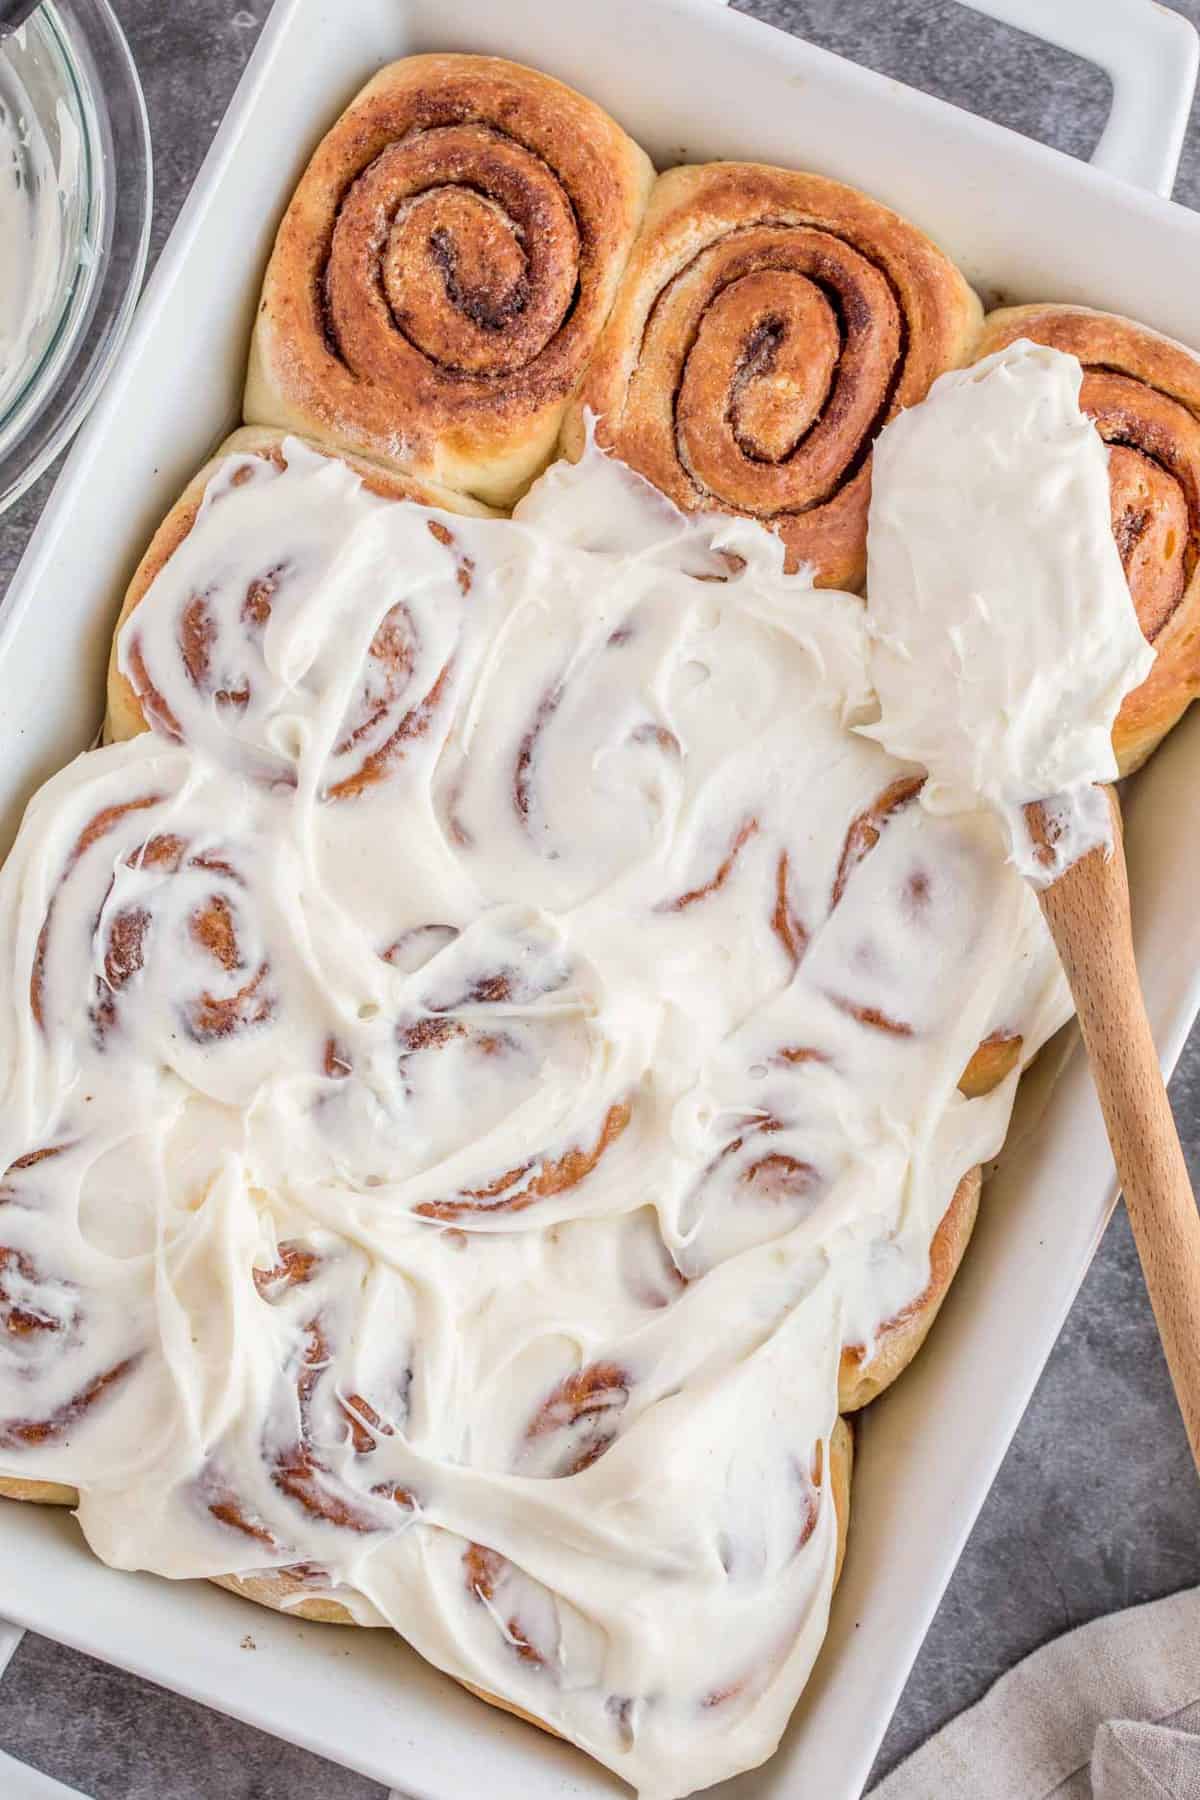 Cinnamon rolls with frosting in a baking dish.